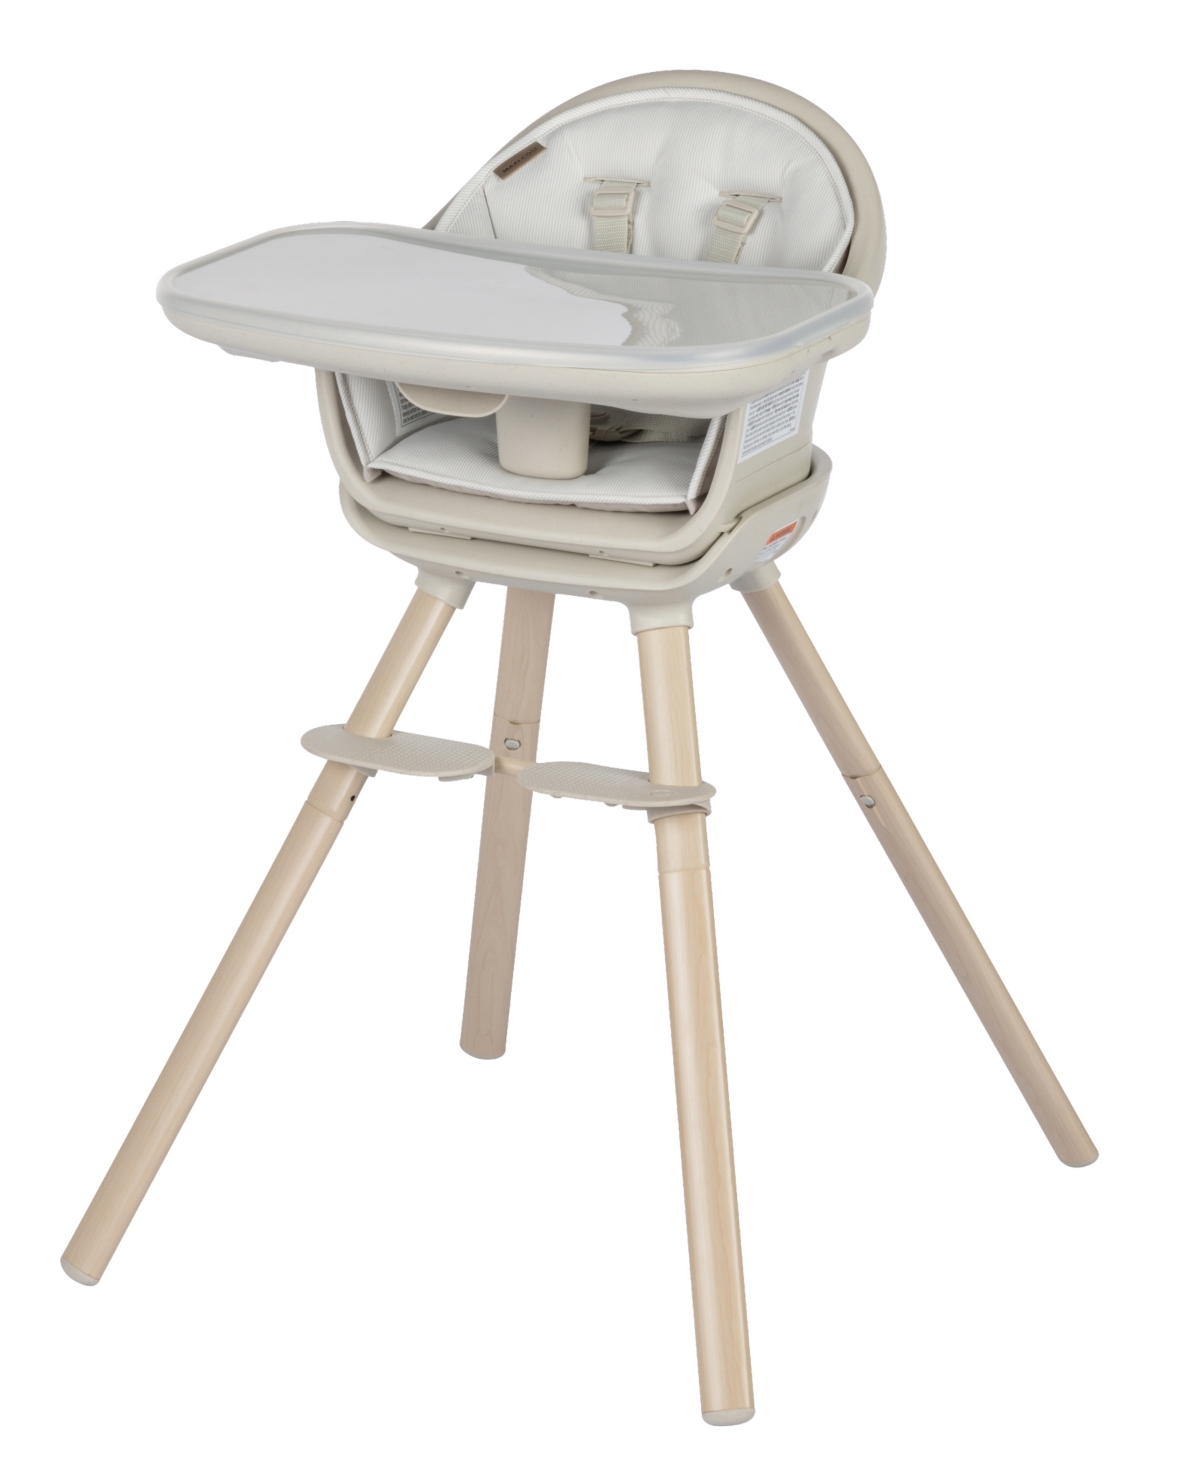 Maxi-cosi Baby Boys Or Baby Girls Moa 8-in-1 Highchair In Classic Oat